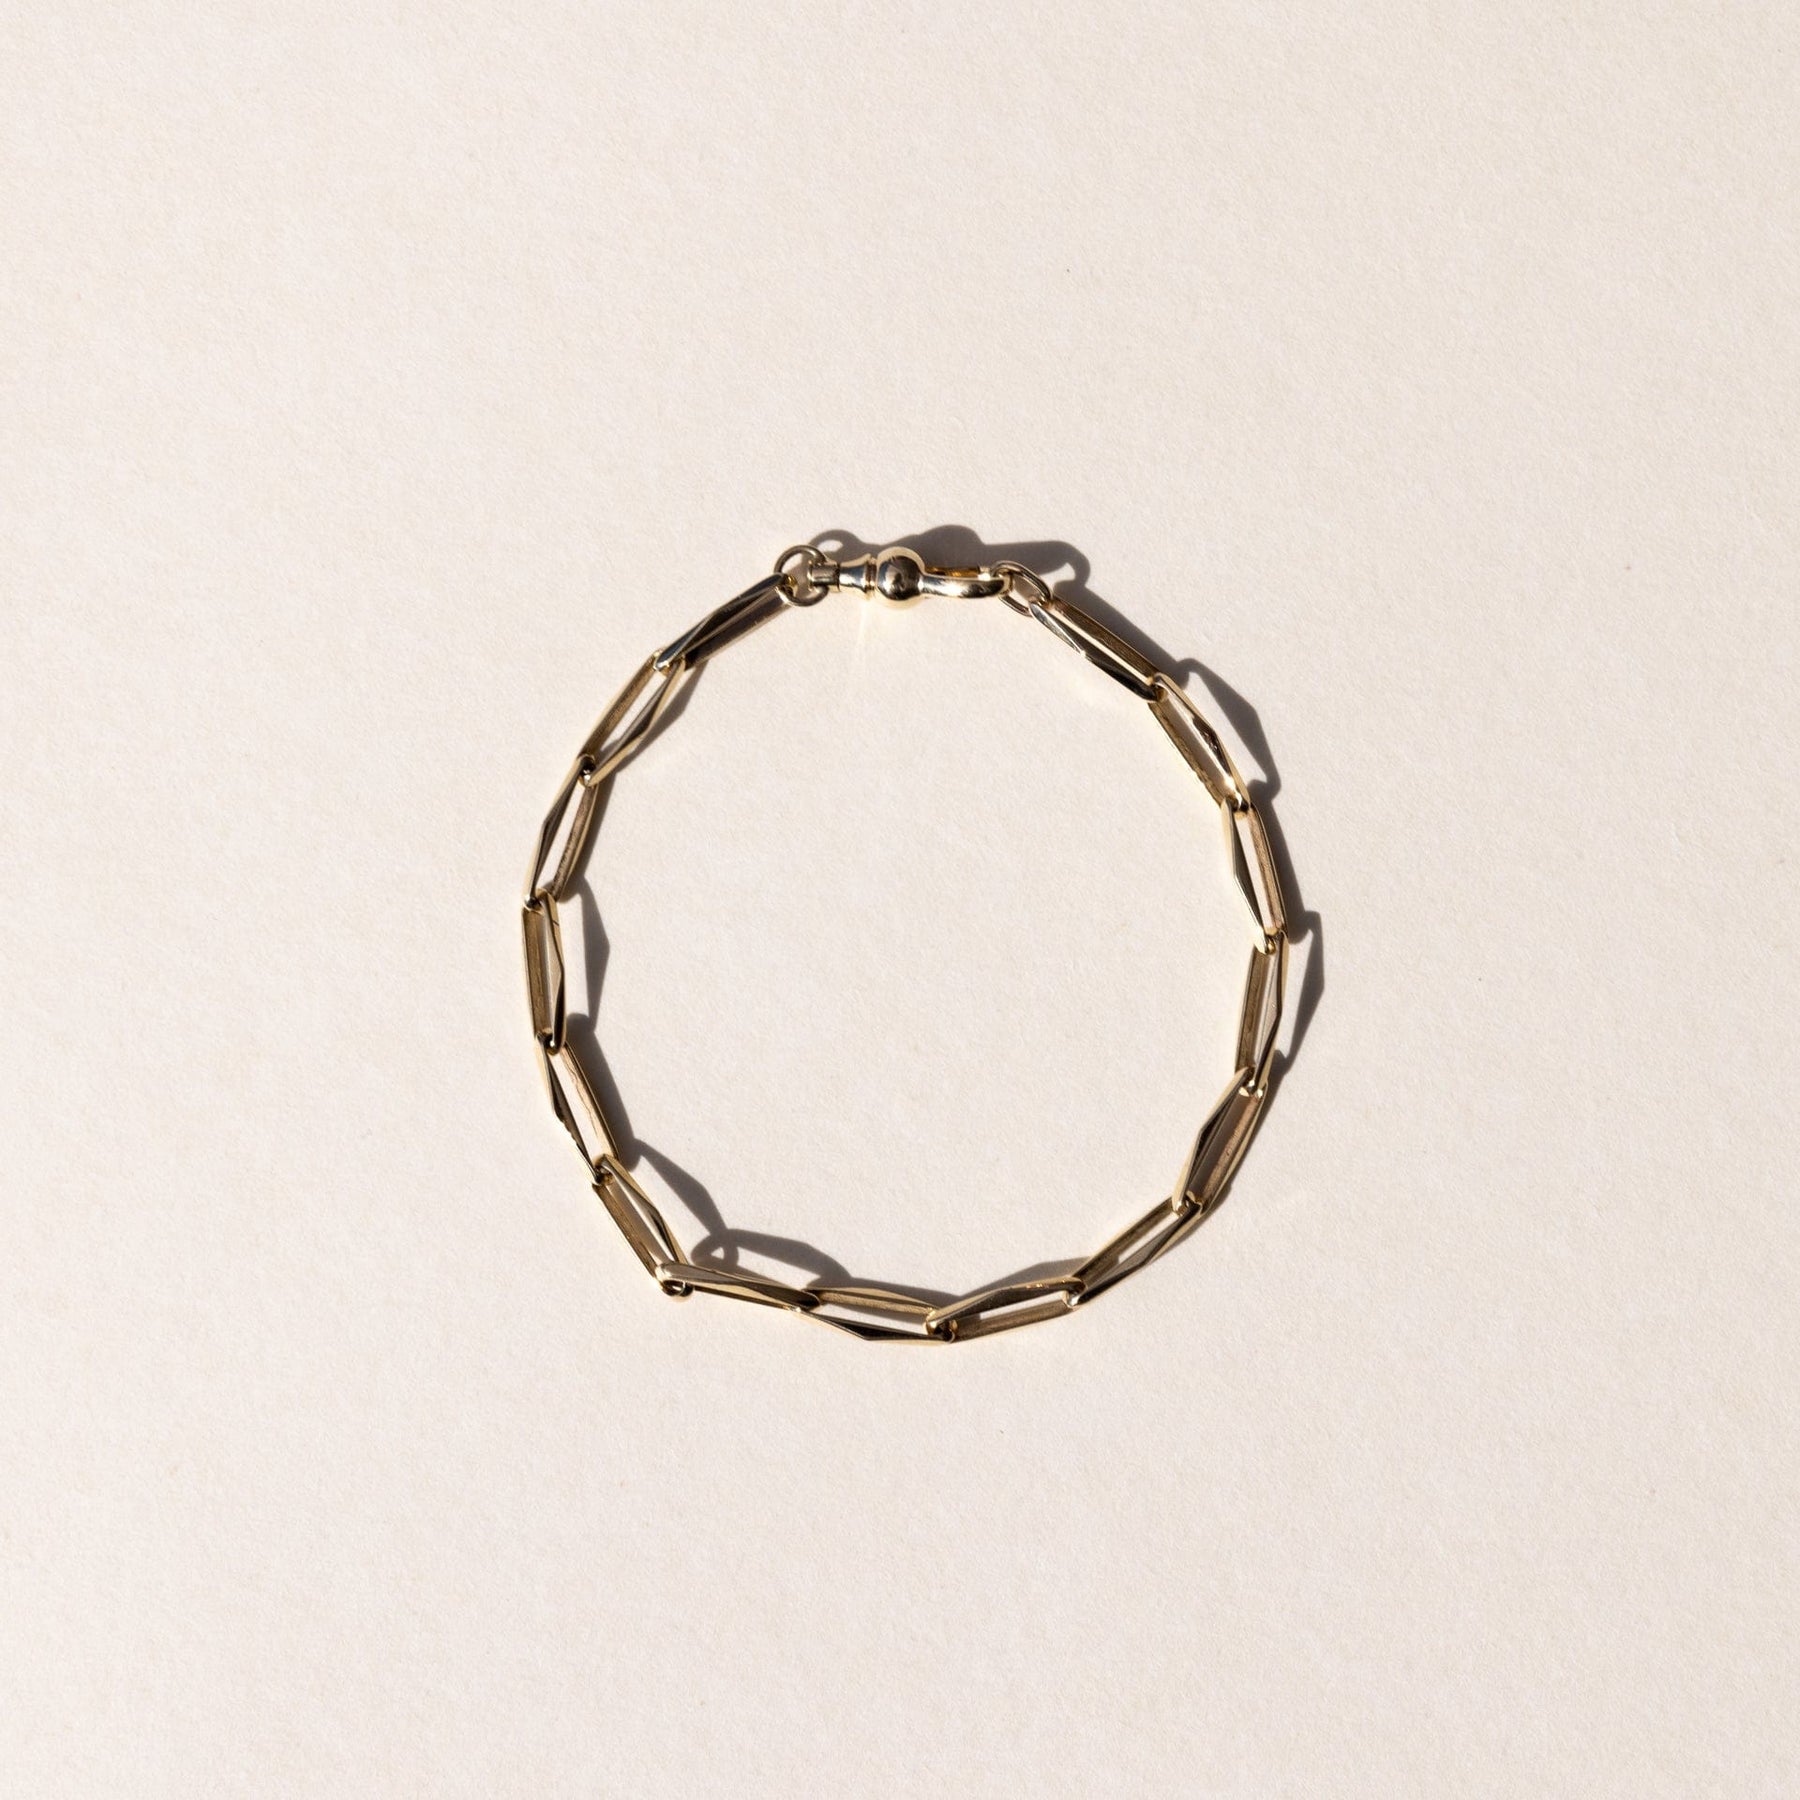 Handcrafted 9ct Yellow Gold Chainlink Bracelet 